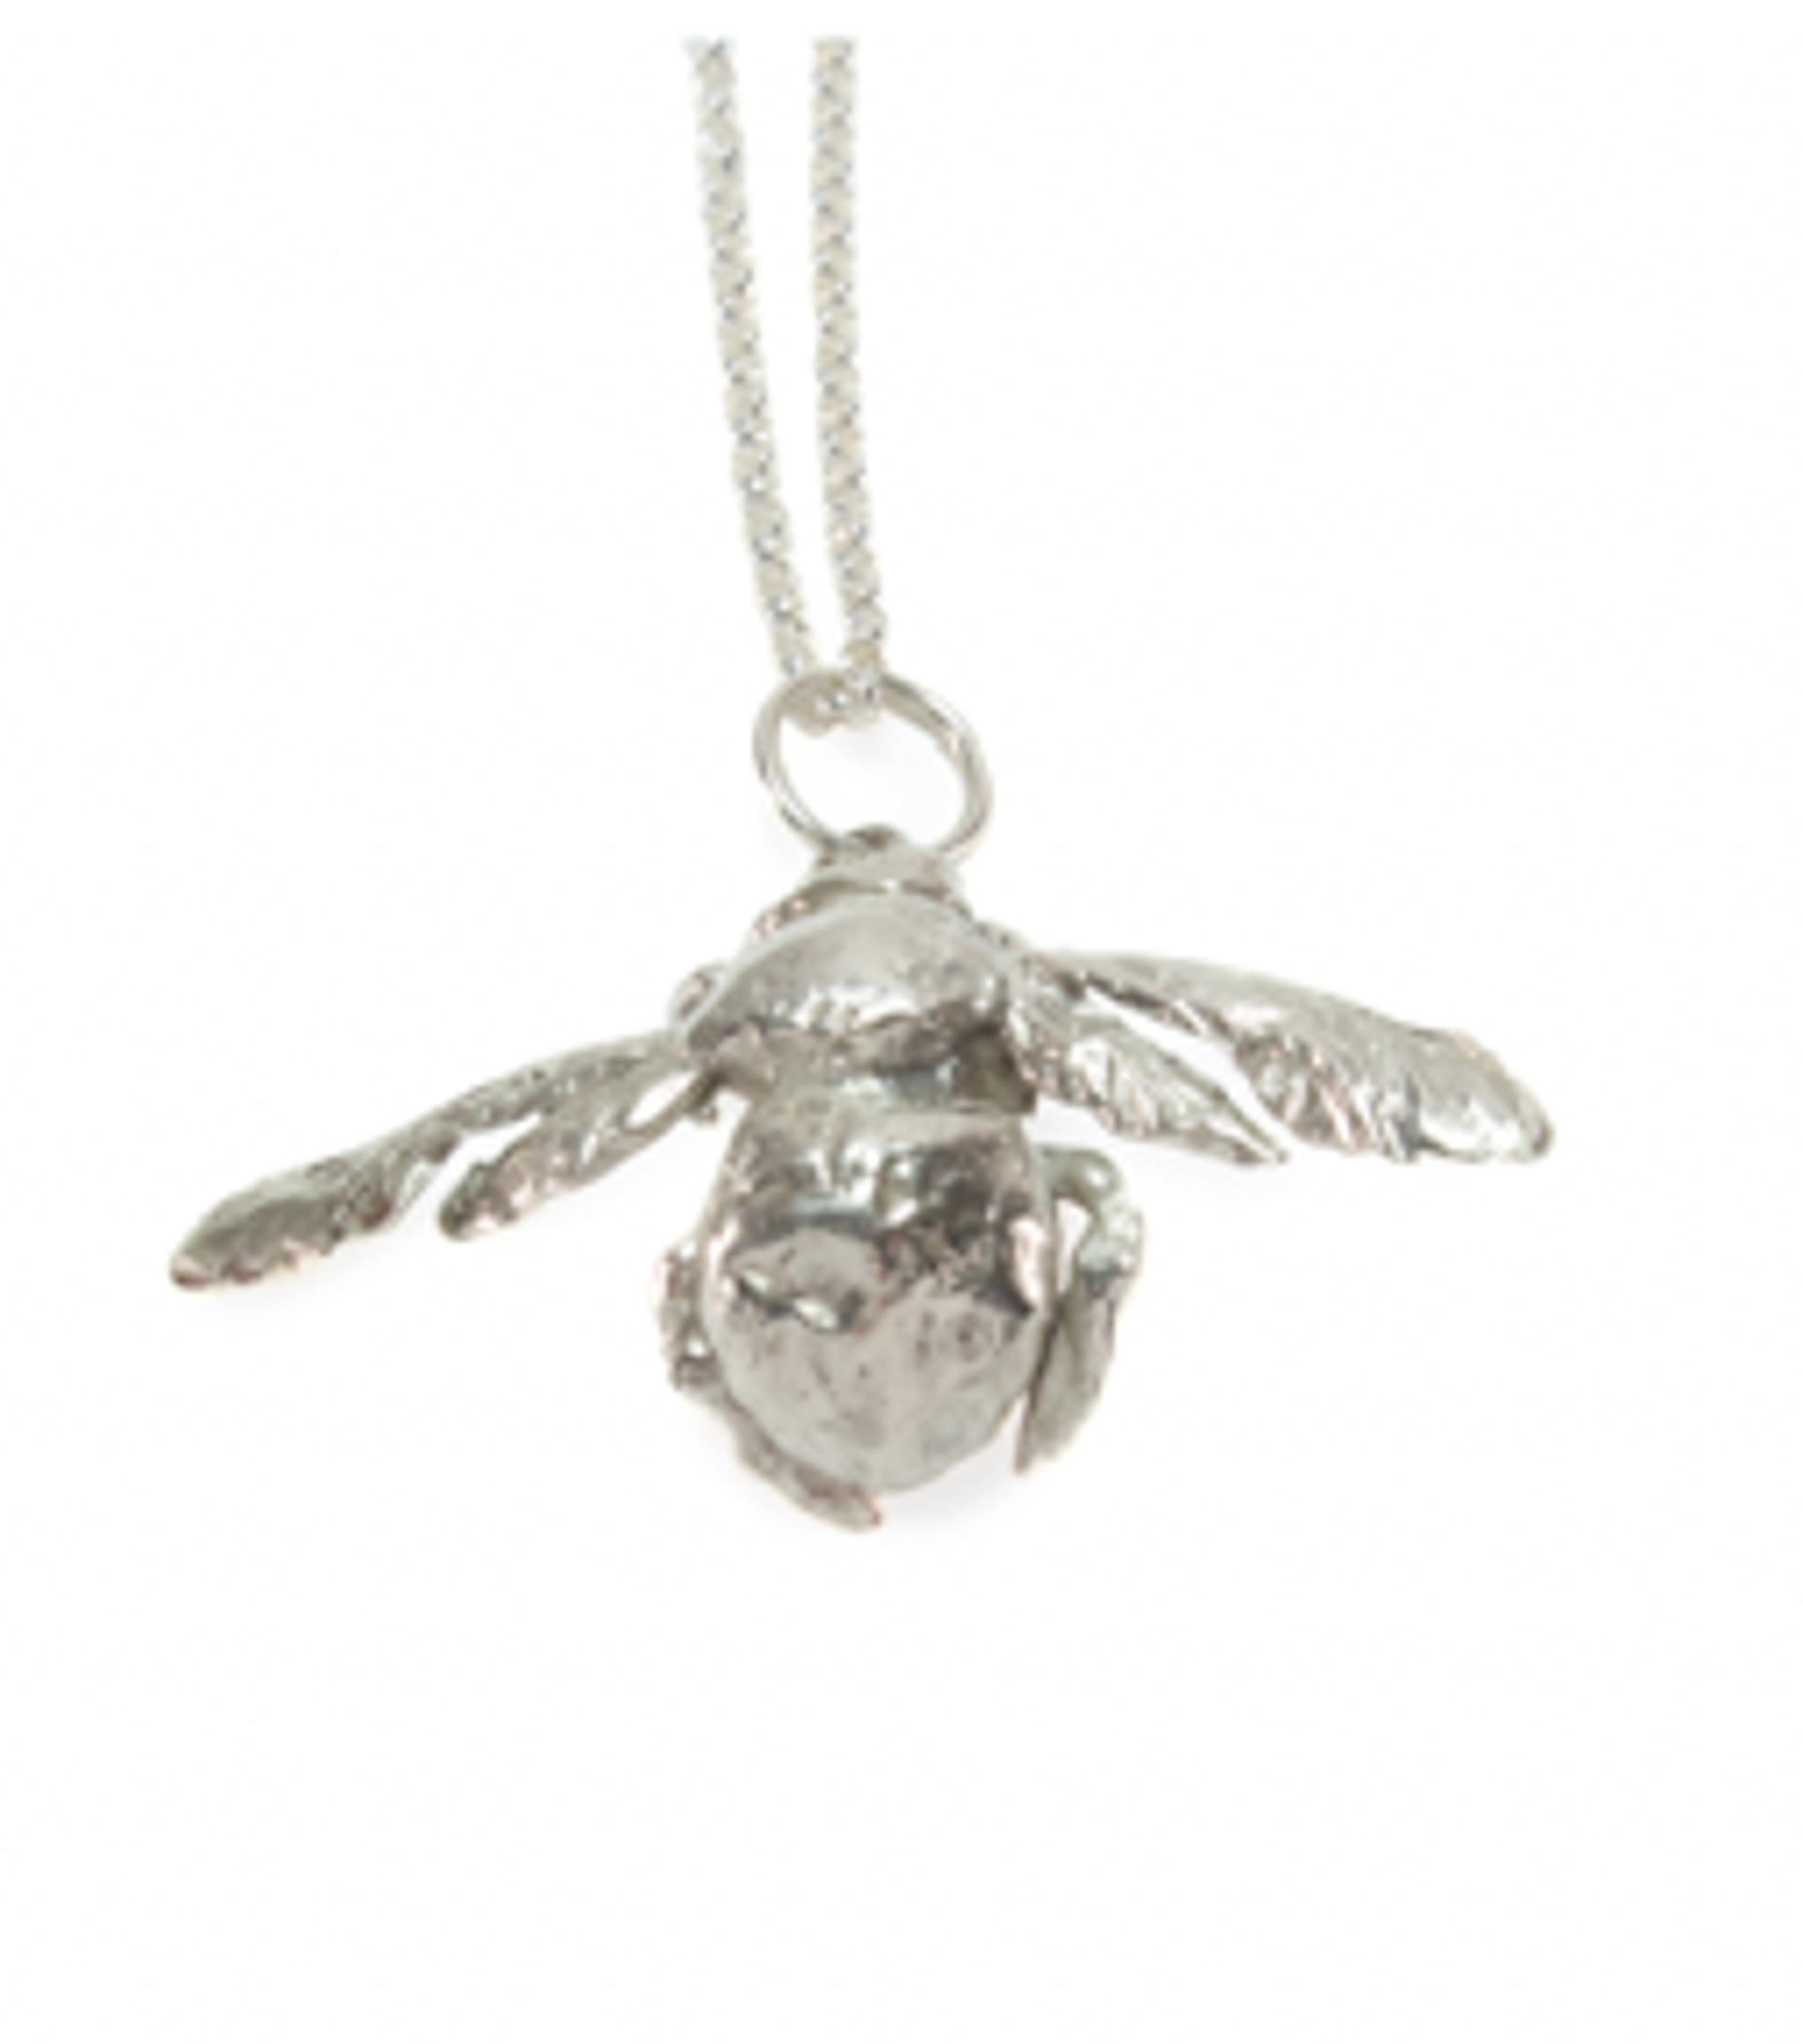 Carpenter Bee Pendant in Sterling Silver by Audrey Laine